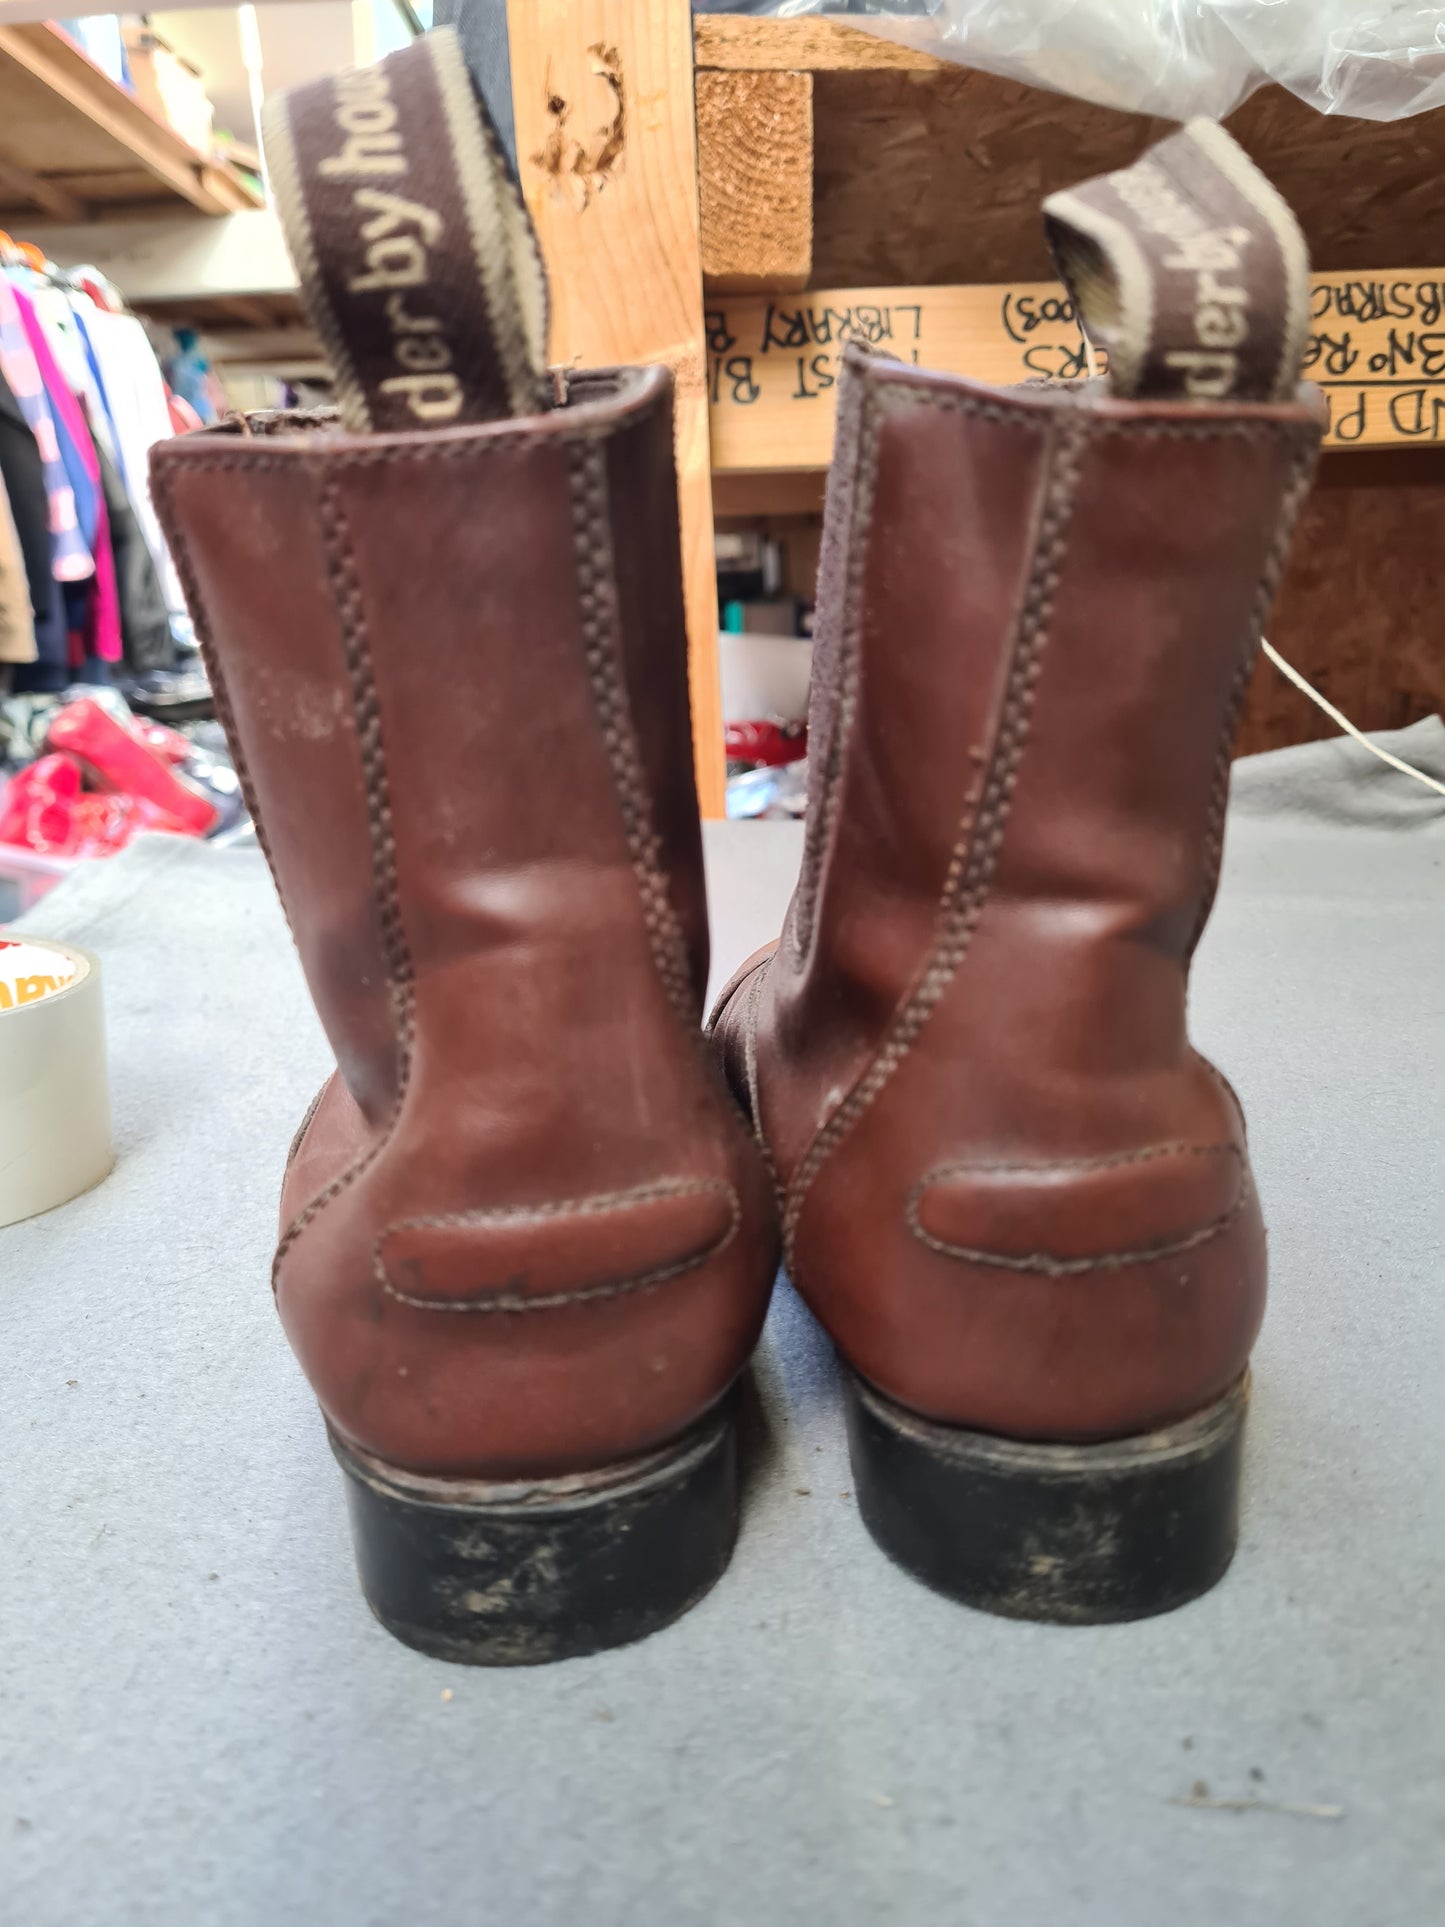 Derby house oxblood jodhpur boots, leather childs size 13 FREE POSTAGE ■